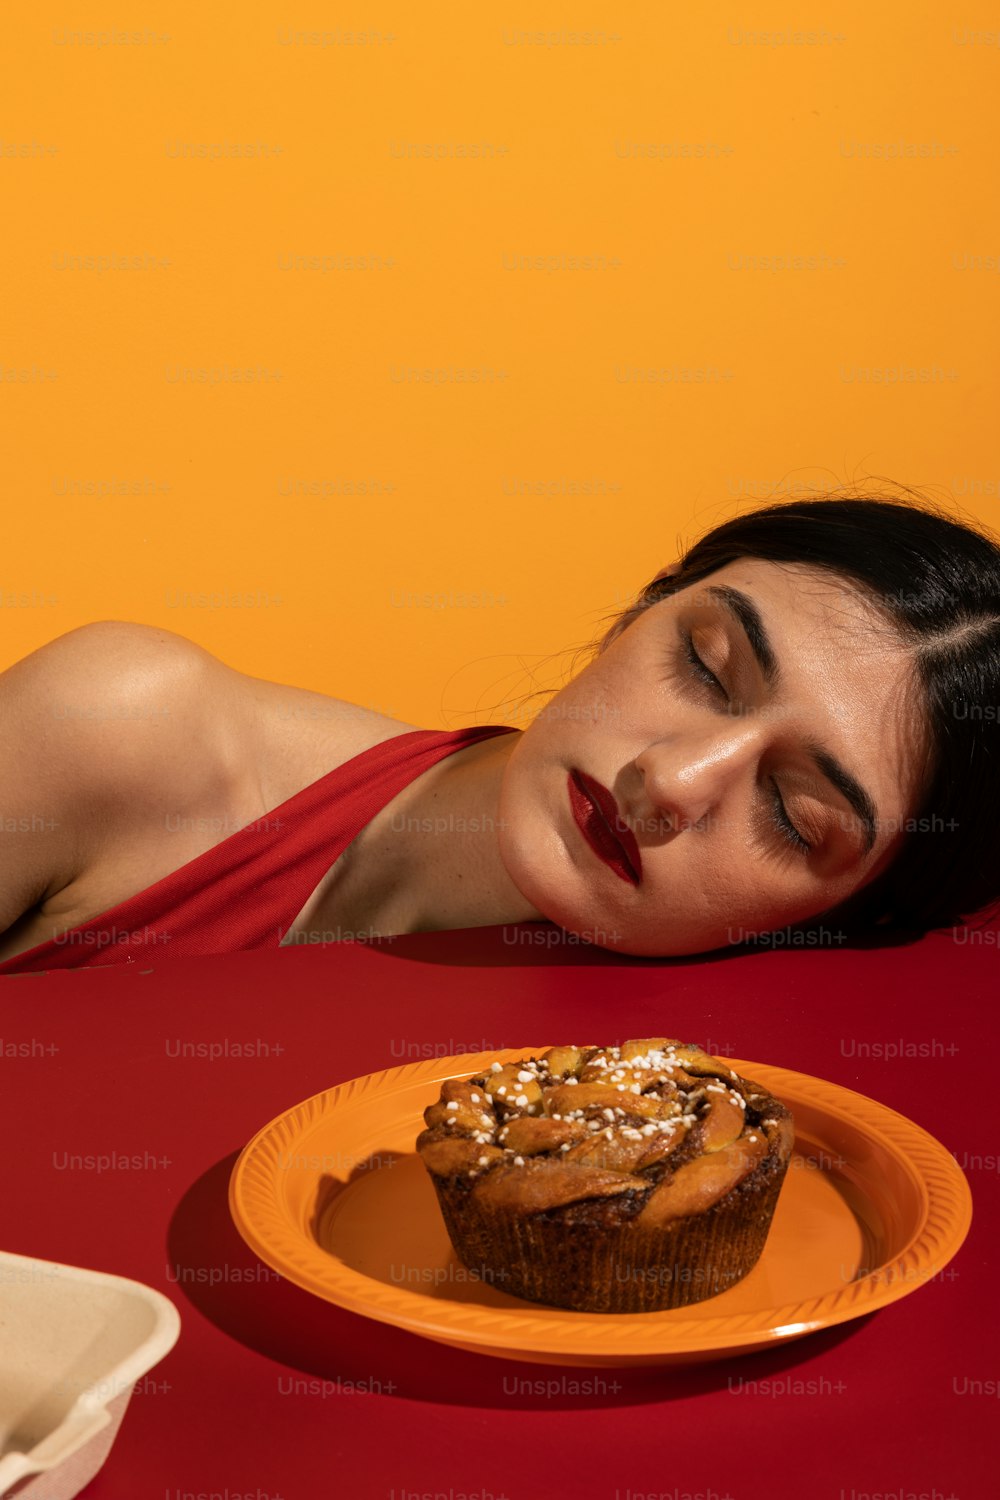 a woman laying down next to a plate with a cupcake on it